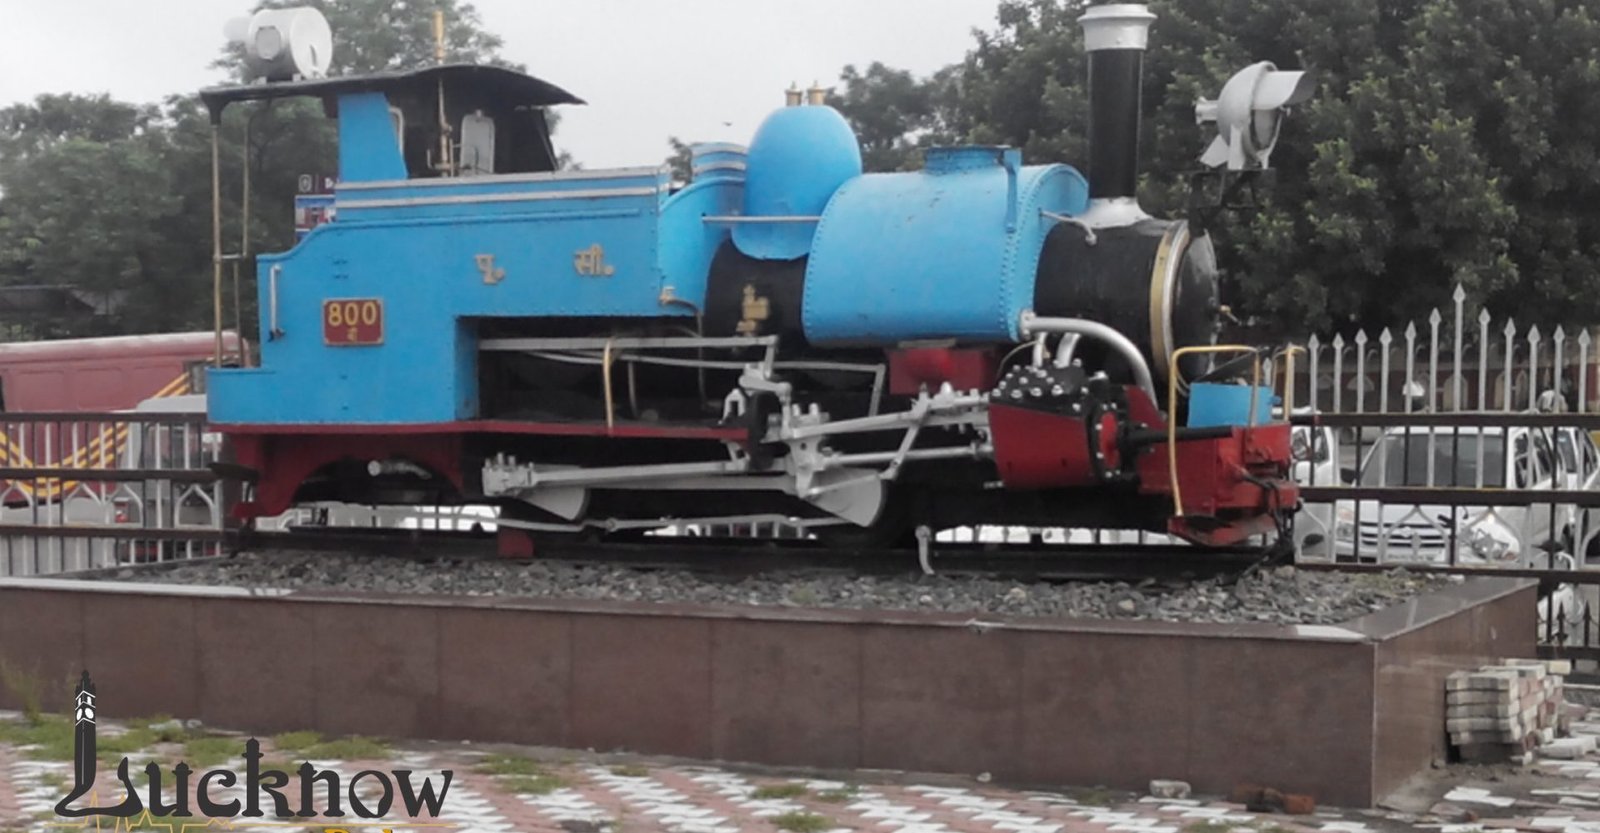 old engine in charbagh-visit lucknow